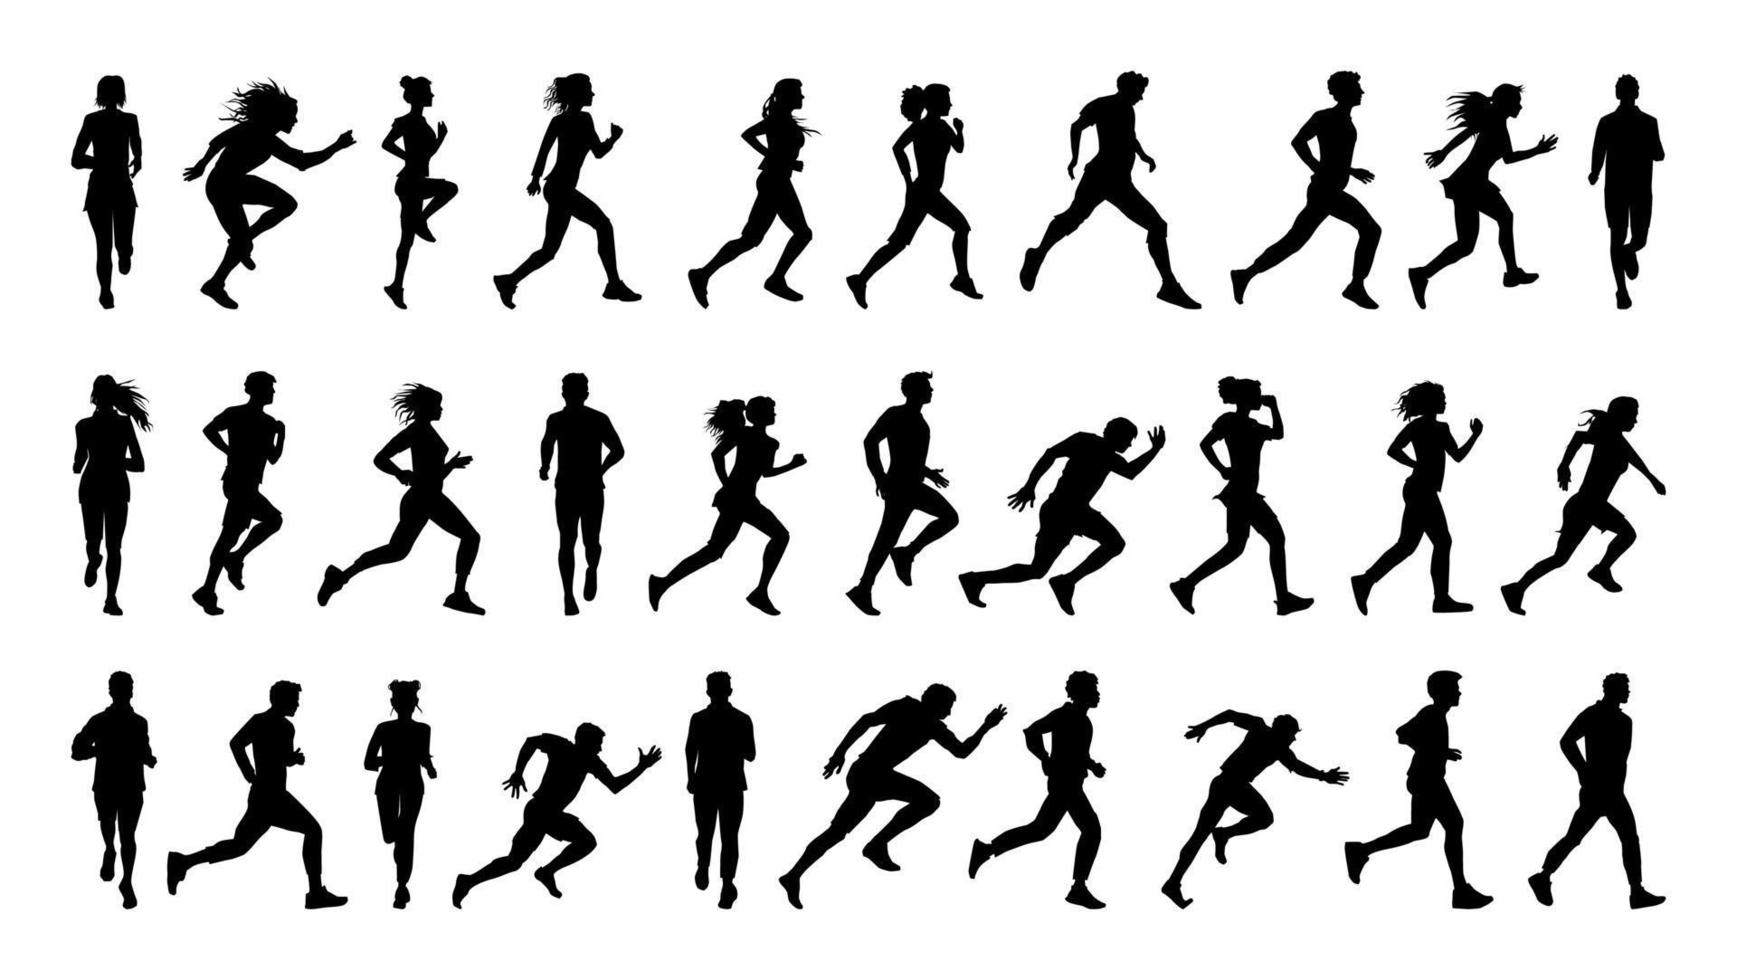 Runners Silhouettes Set vector